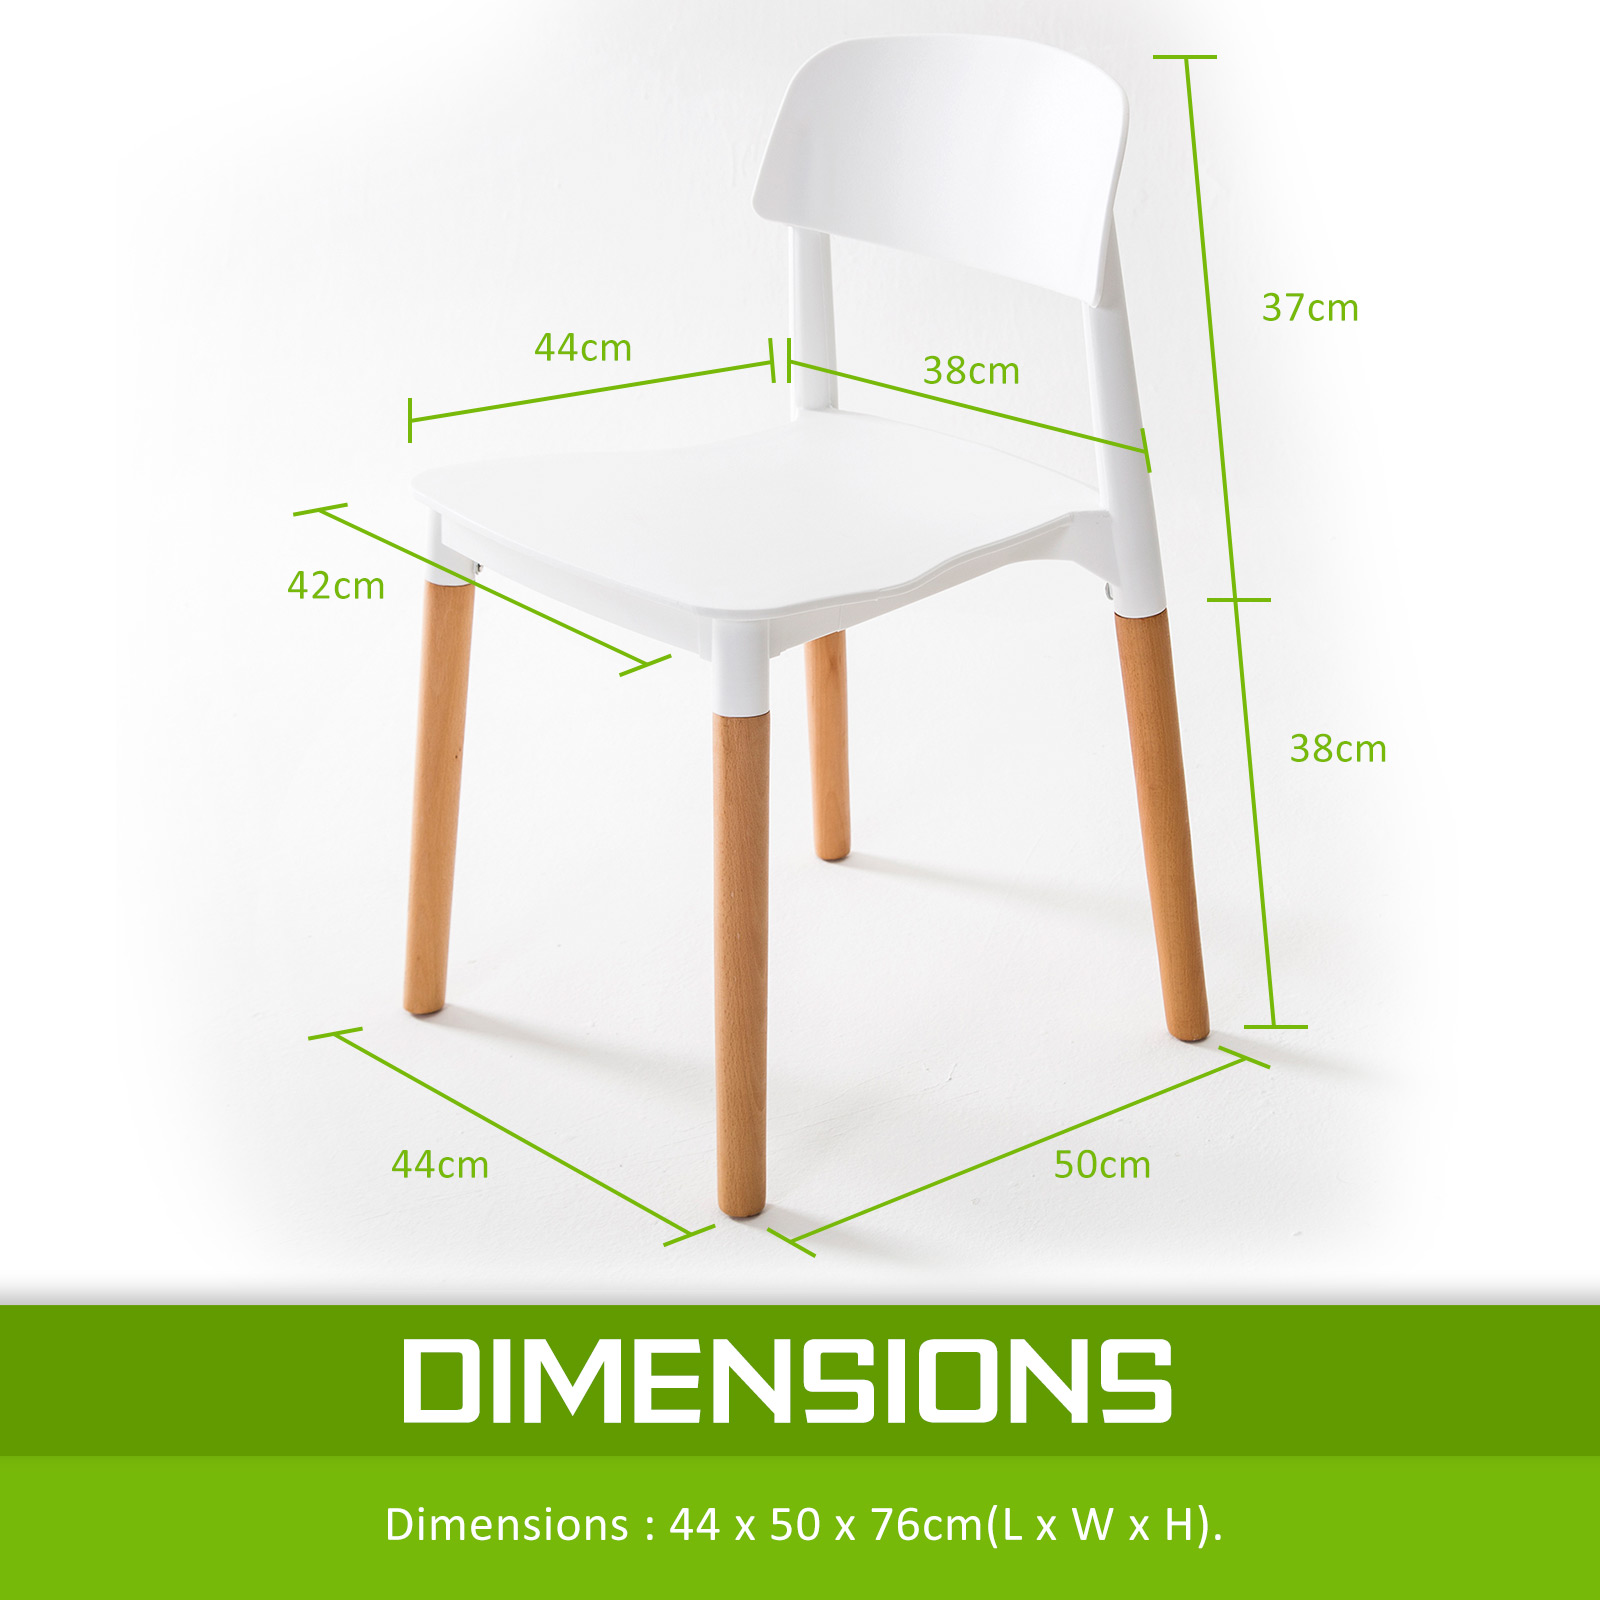 Cafe Table And Chairs Dimensions